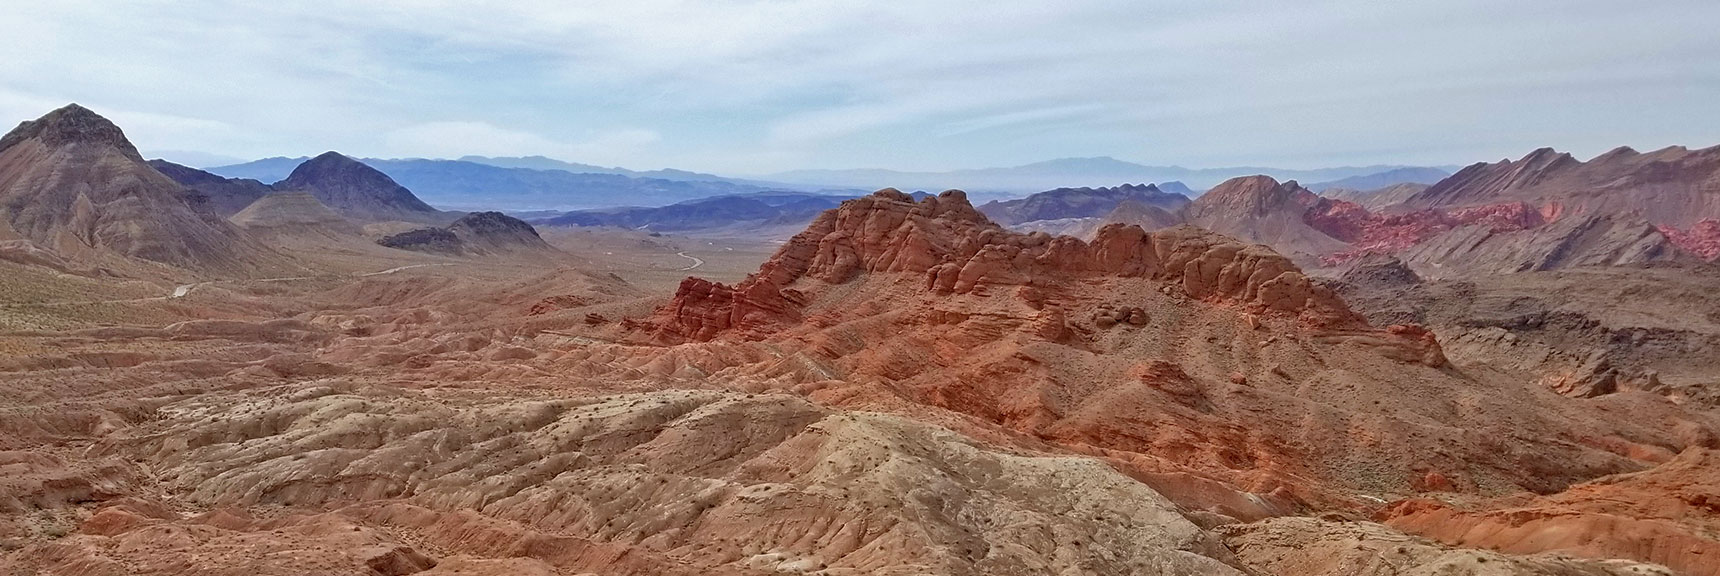 View from Summit of Northshore Summit Trail On Northshore Road in Lake Mead National Park, Nevada